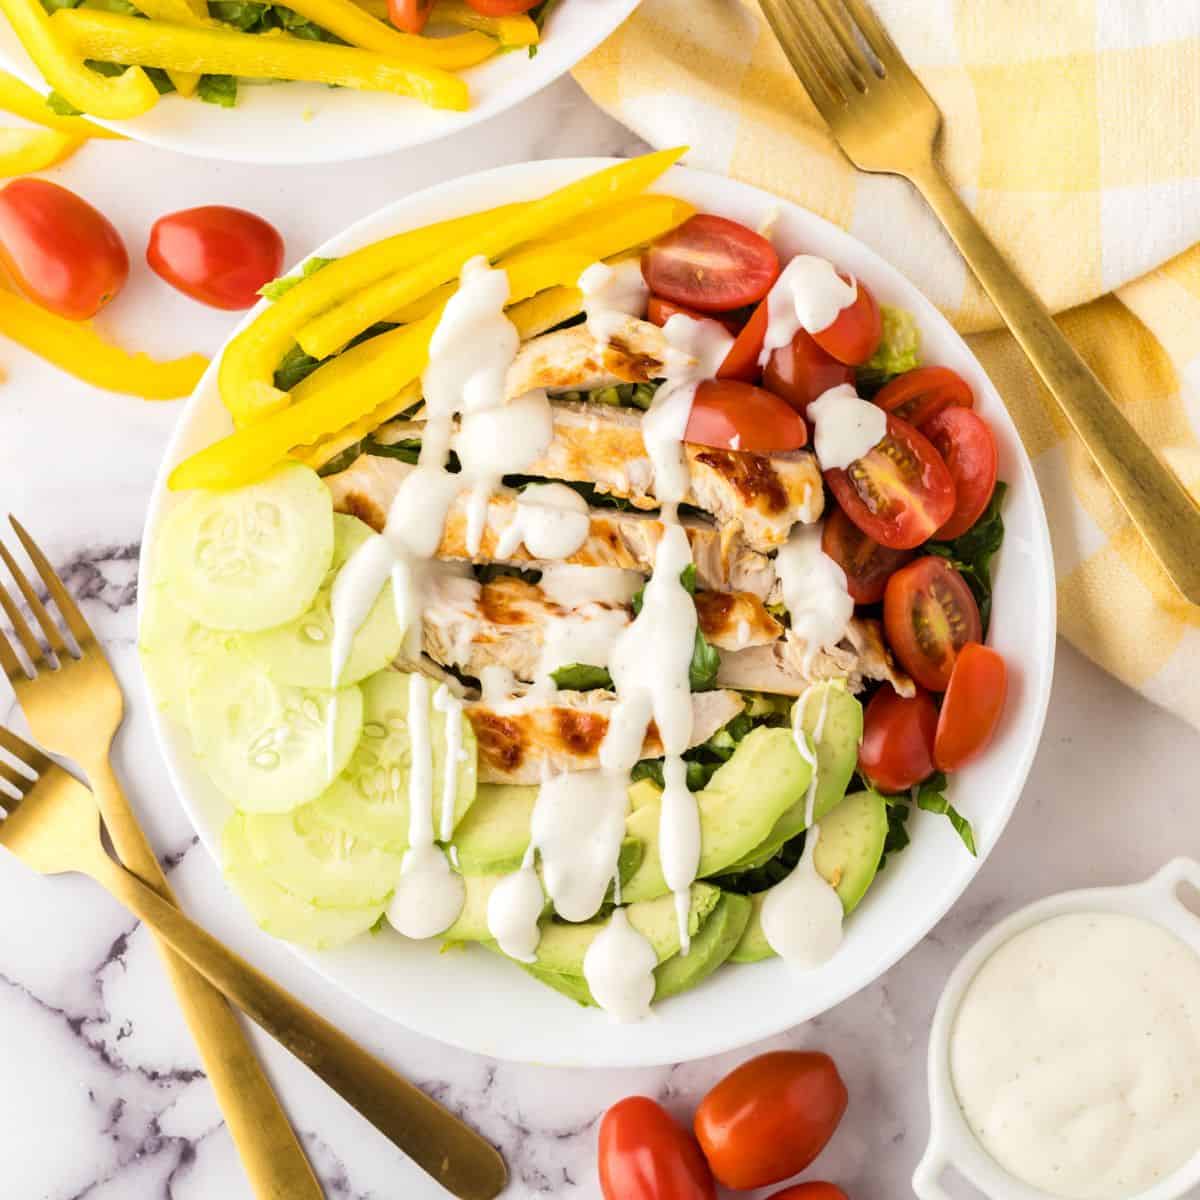 rainbow Grilled chicken salad on a white plate.